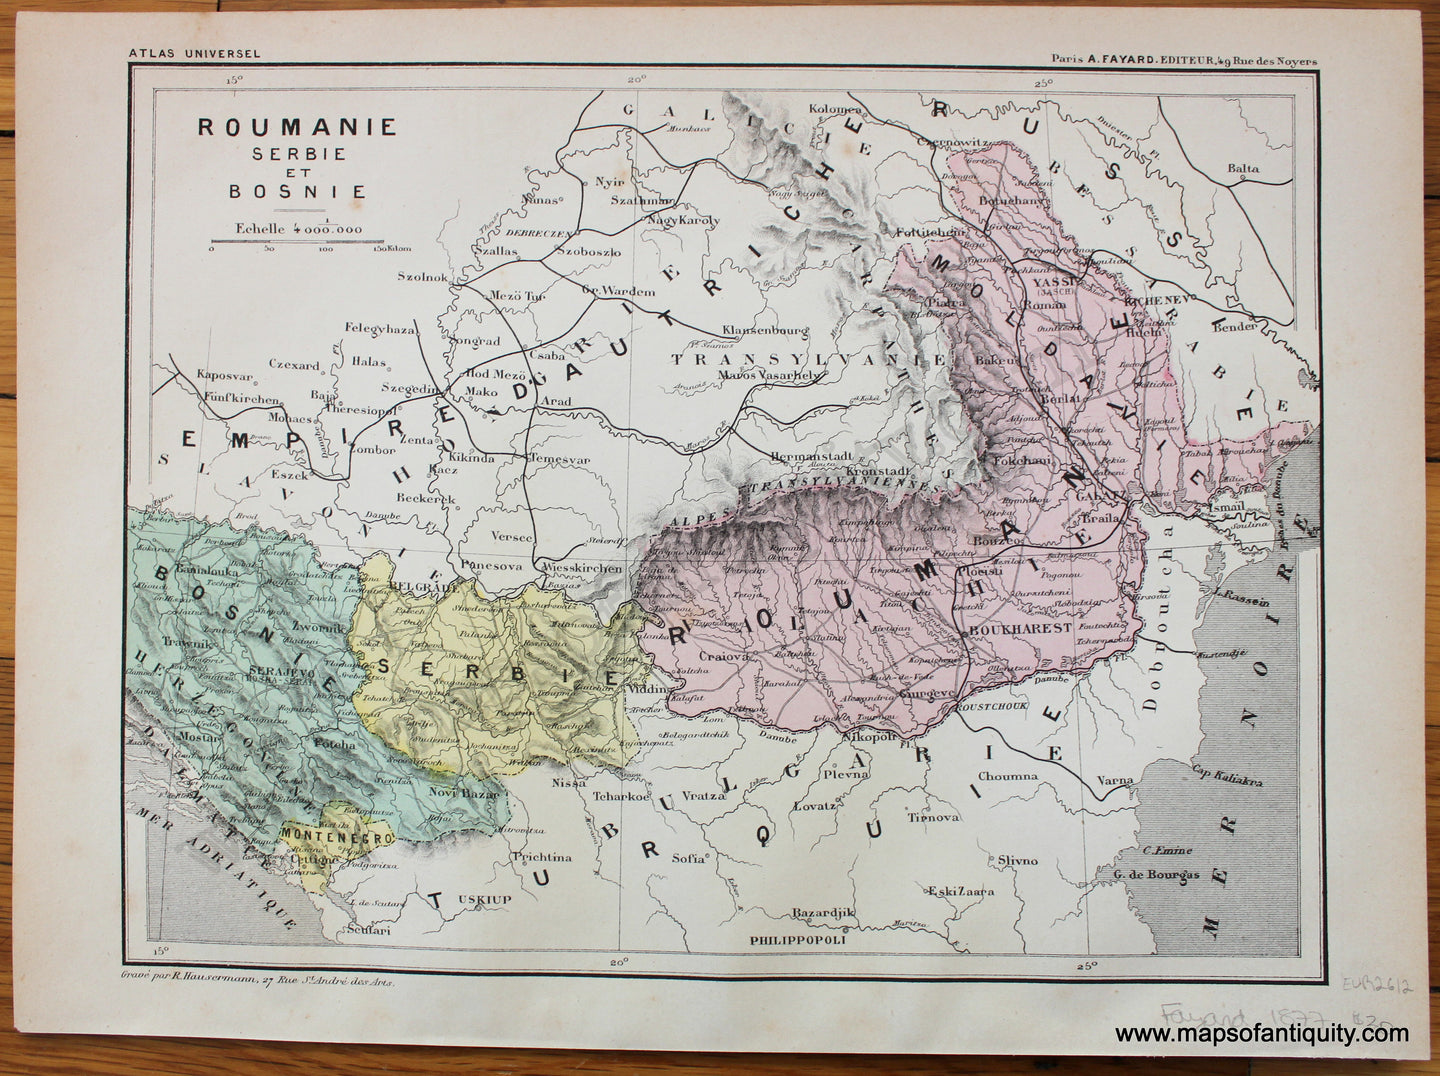 Antique-Printed-Color-Map-Roumanie-Serbie-et-Bosnie-1877-Fayard-Eastern-Europe--1800s-19th-century-Maps-of-Antiquity